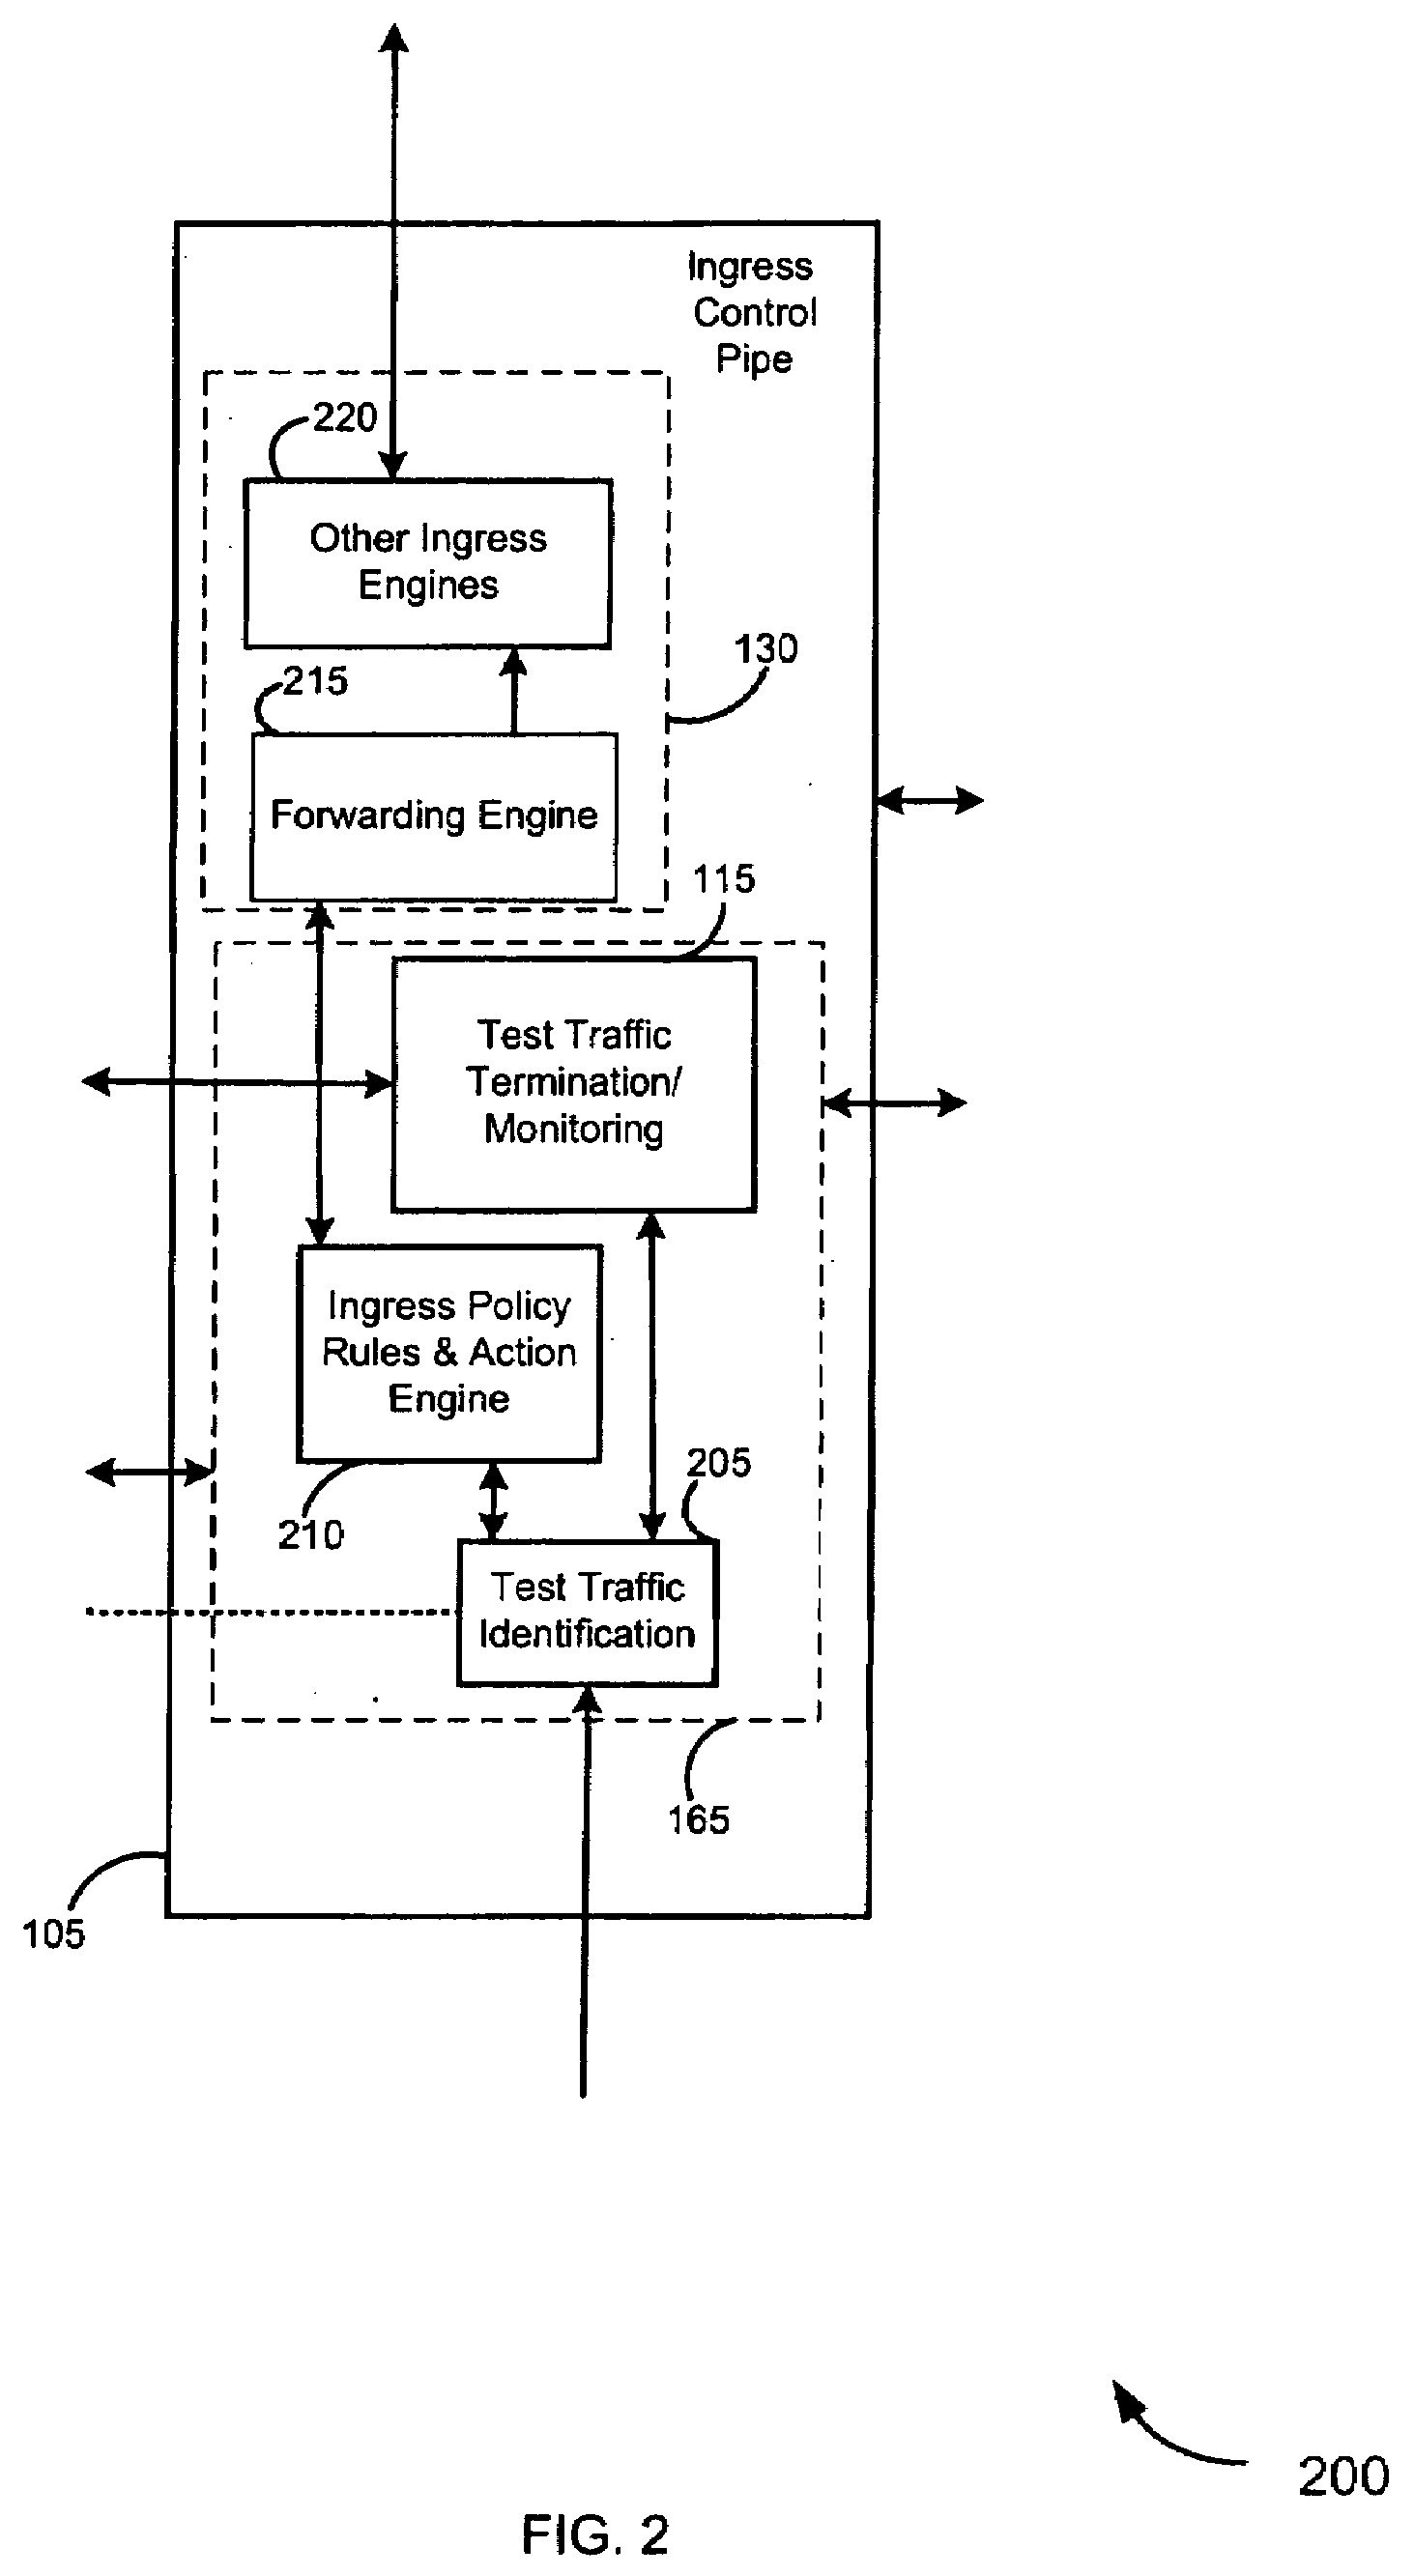 Hardware implementation of network testing and performance monitoring in a network device